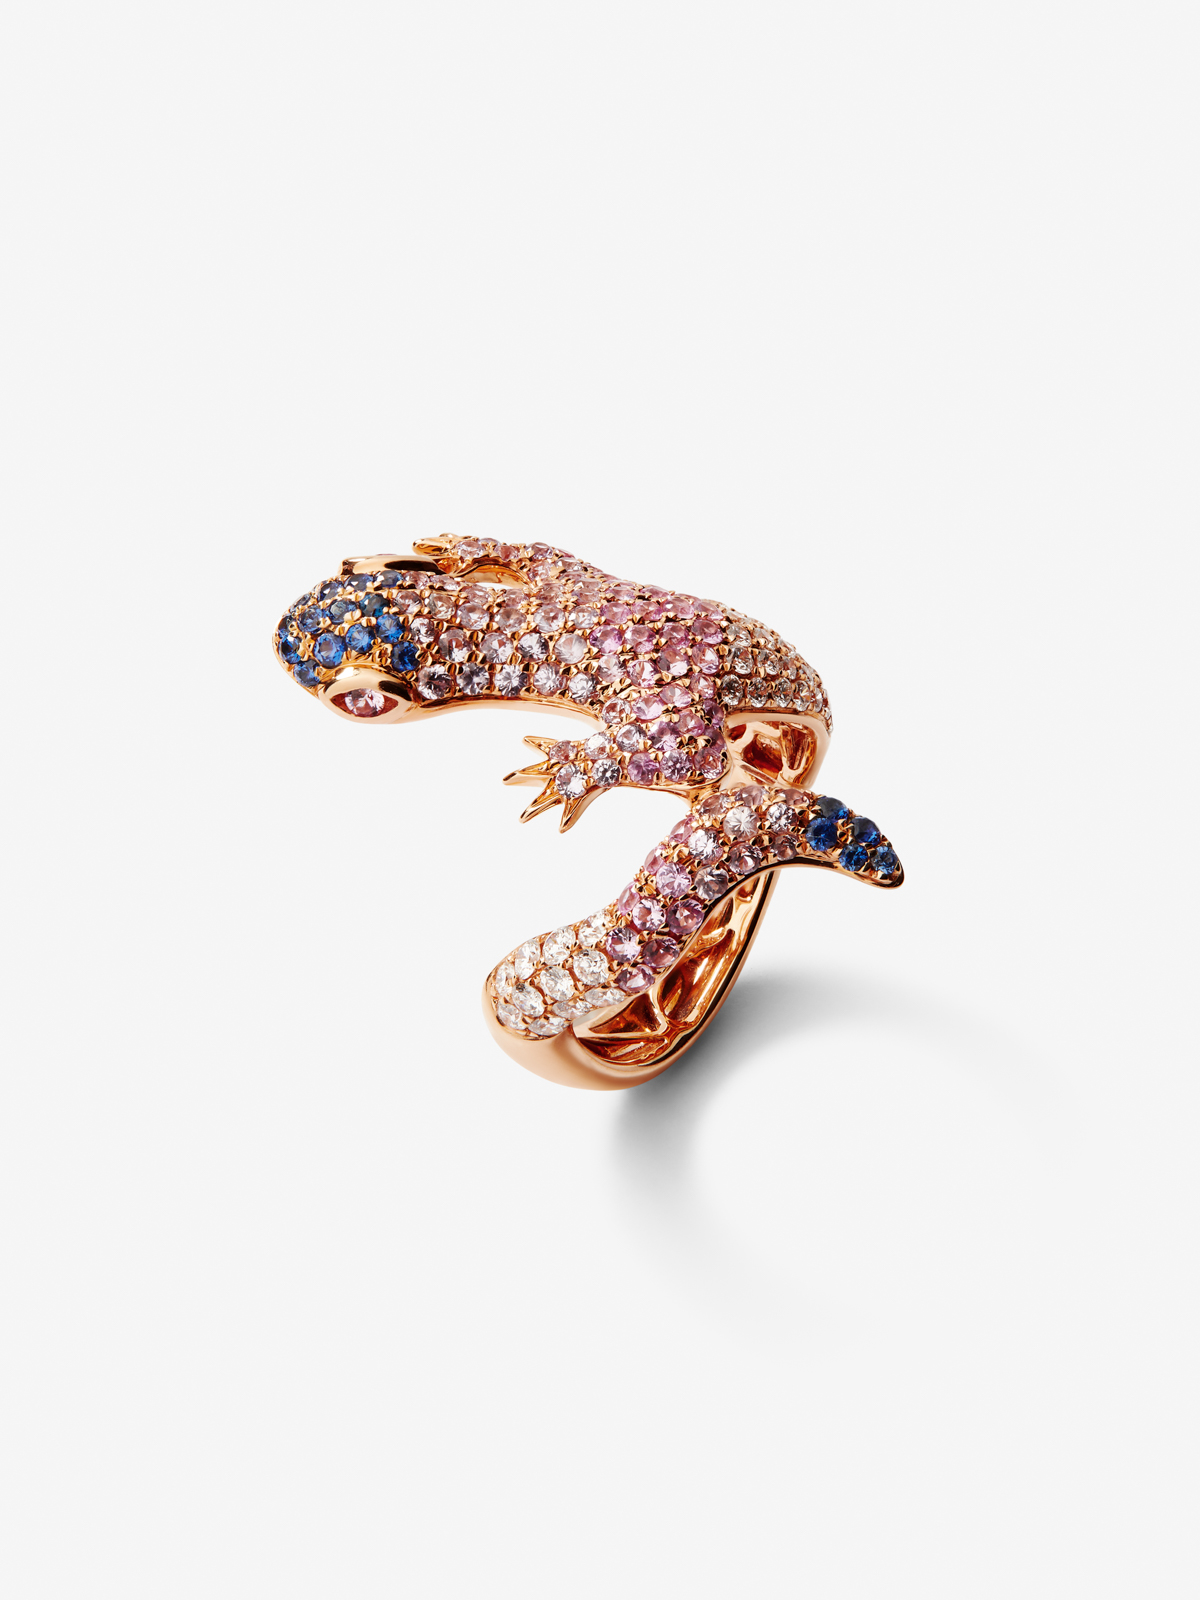 18kt rose gold salamander ring with multicolored sapphires